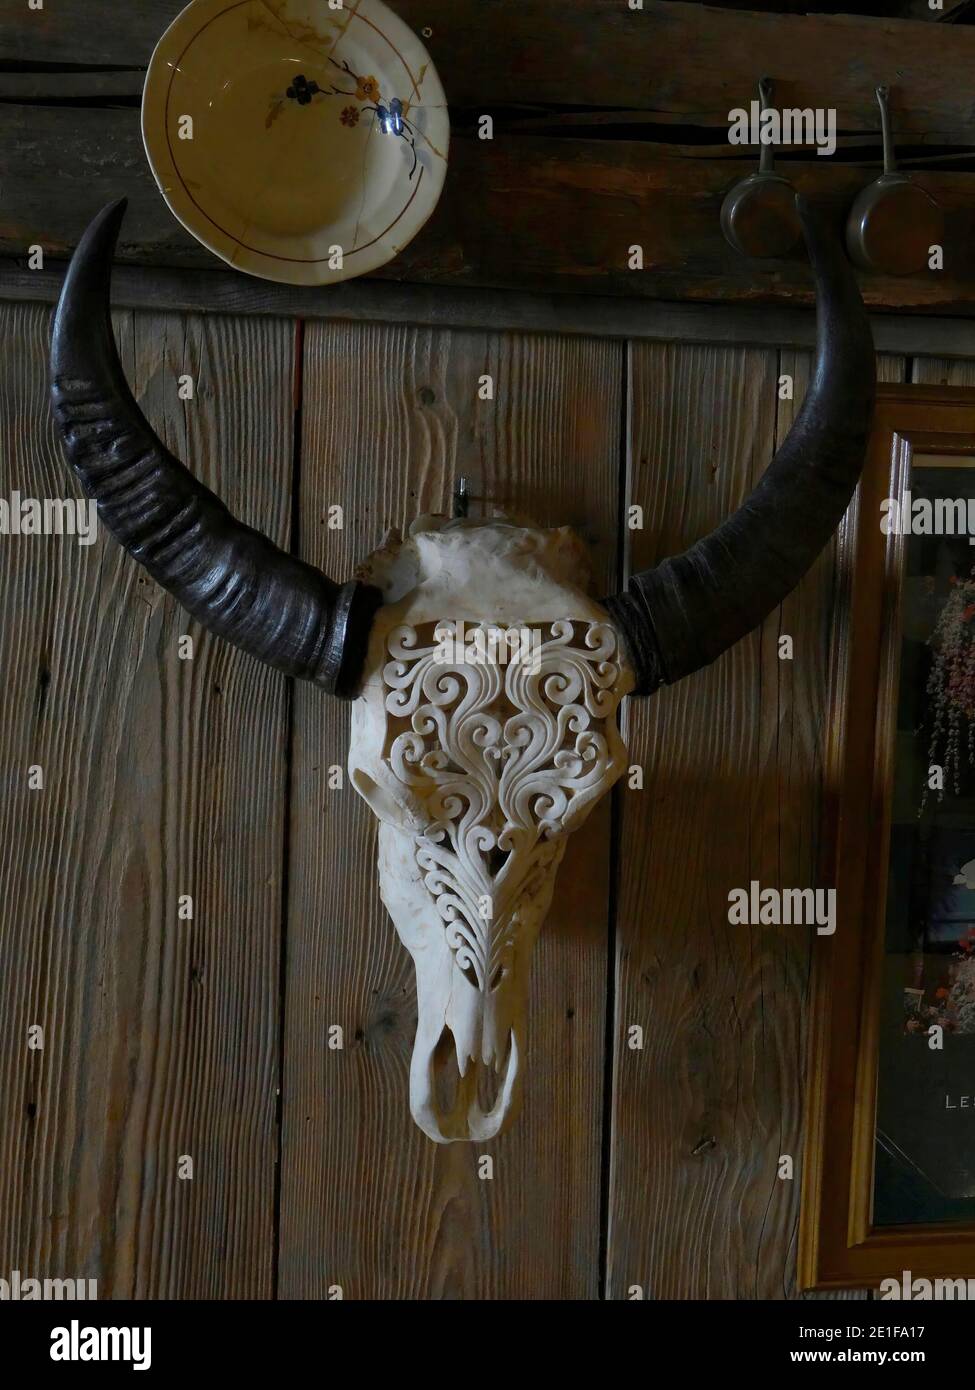 CHATEL, FRANCE - FEB 20, 2018 - Carved skull and horns decorate a rerstaurant in small alpine village of Chatel, France Stock Photo